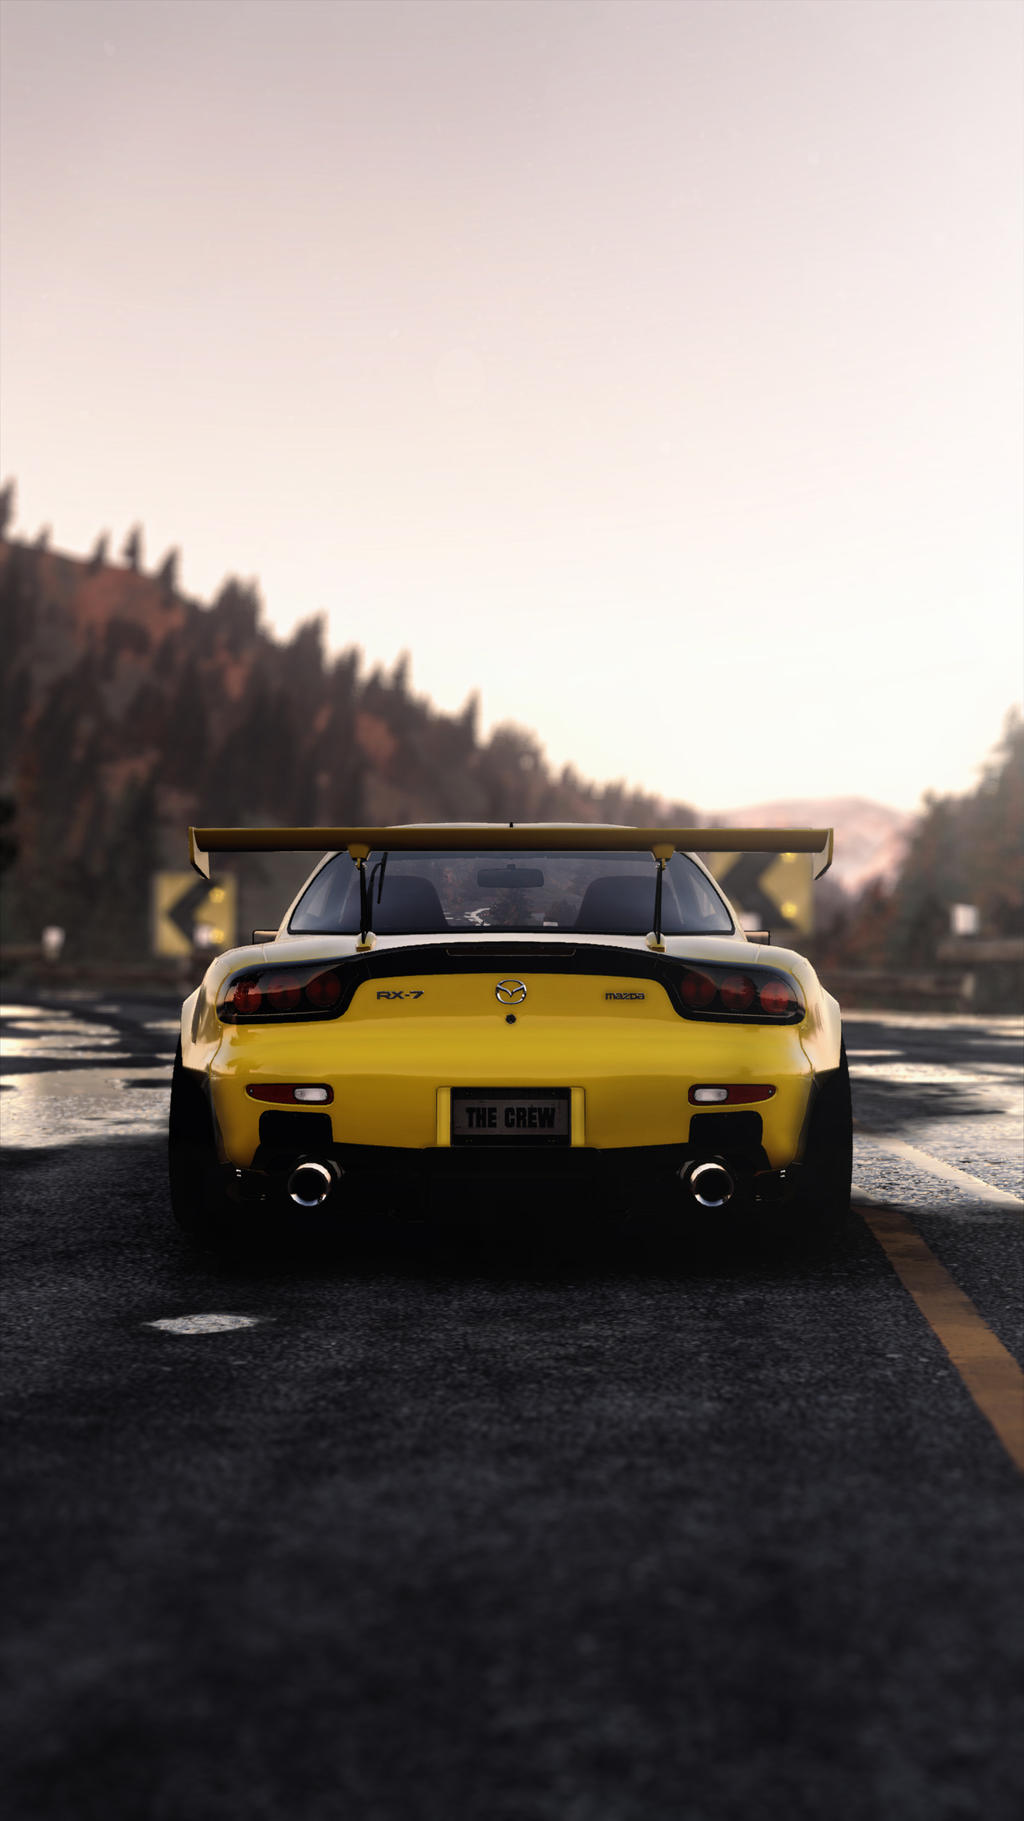 Rx7 Wallpapers